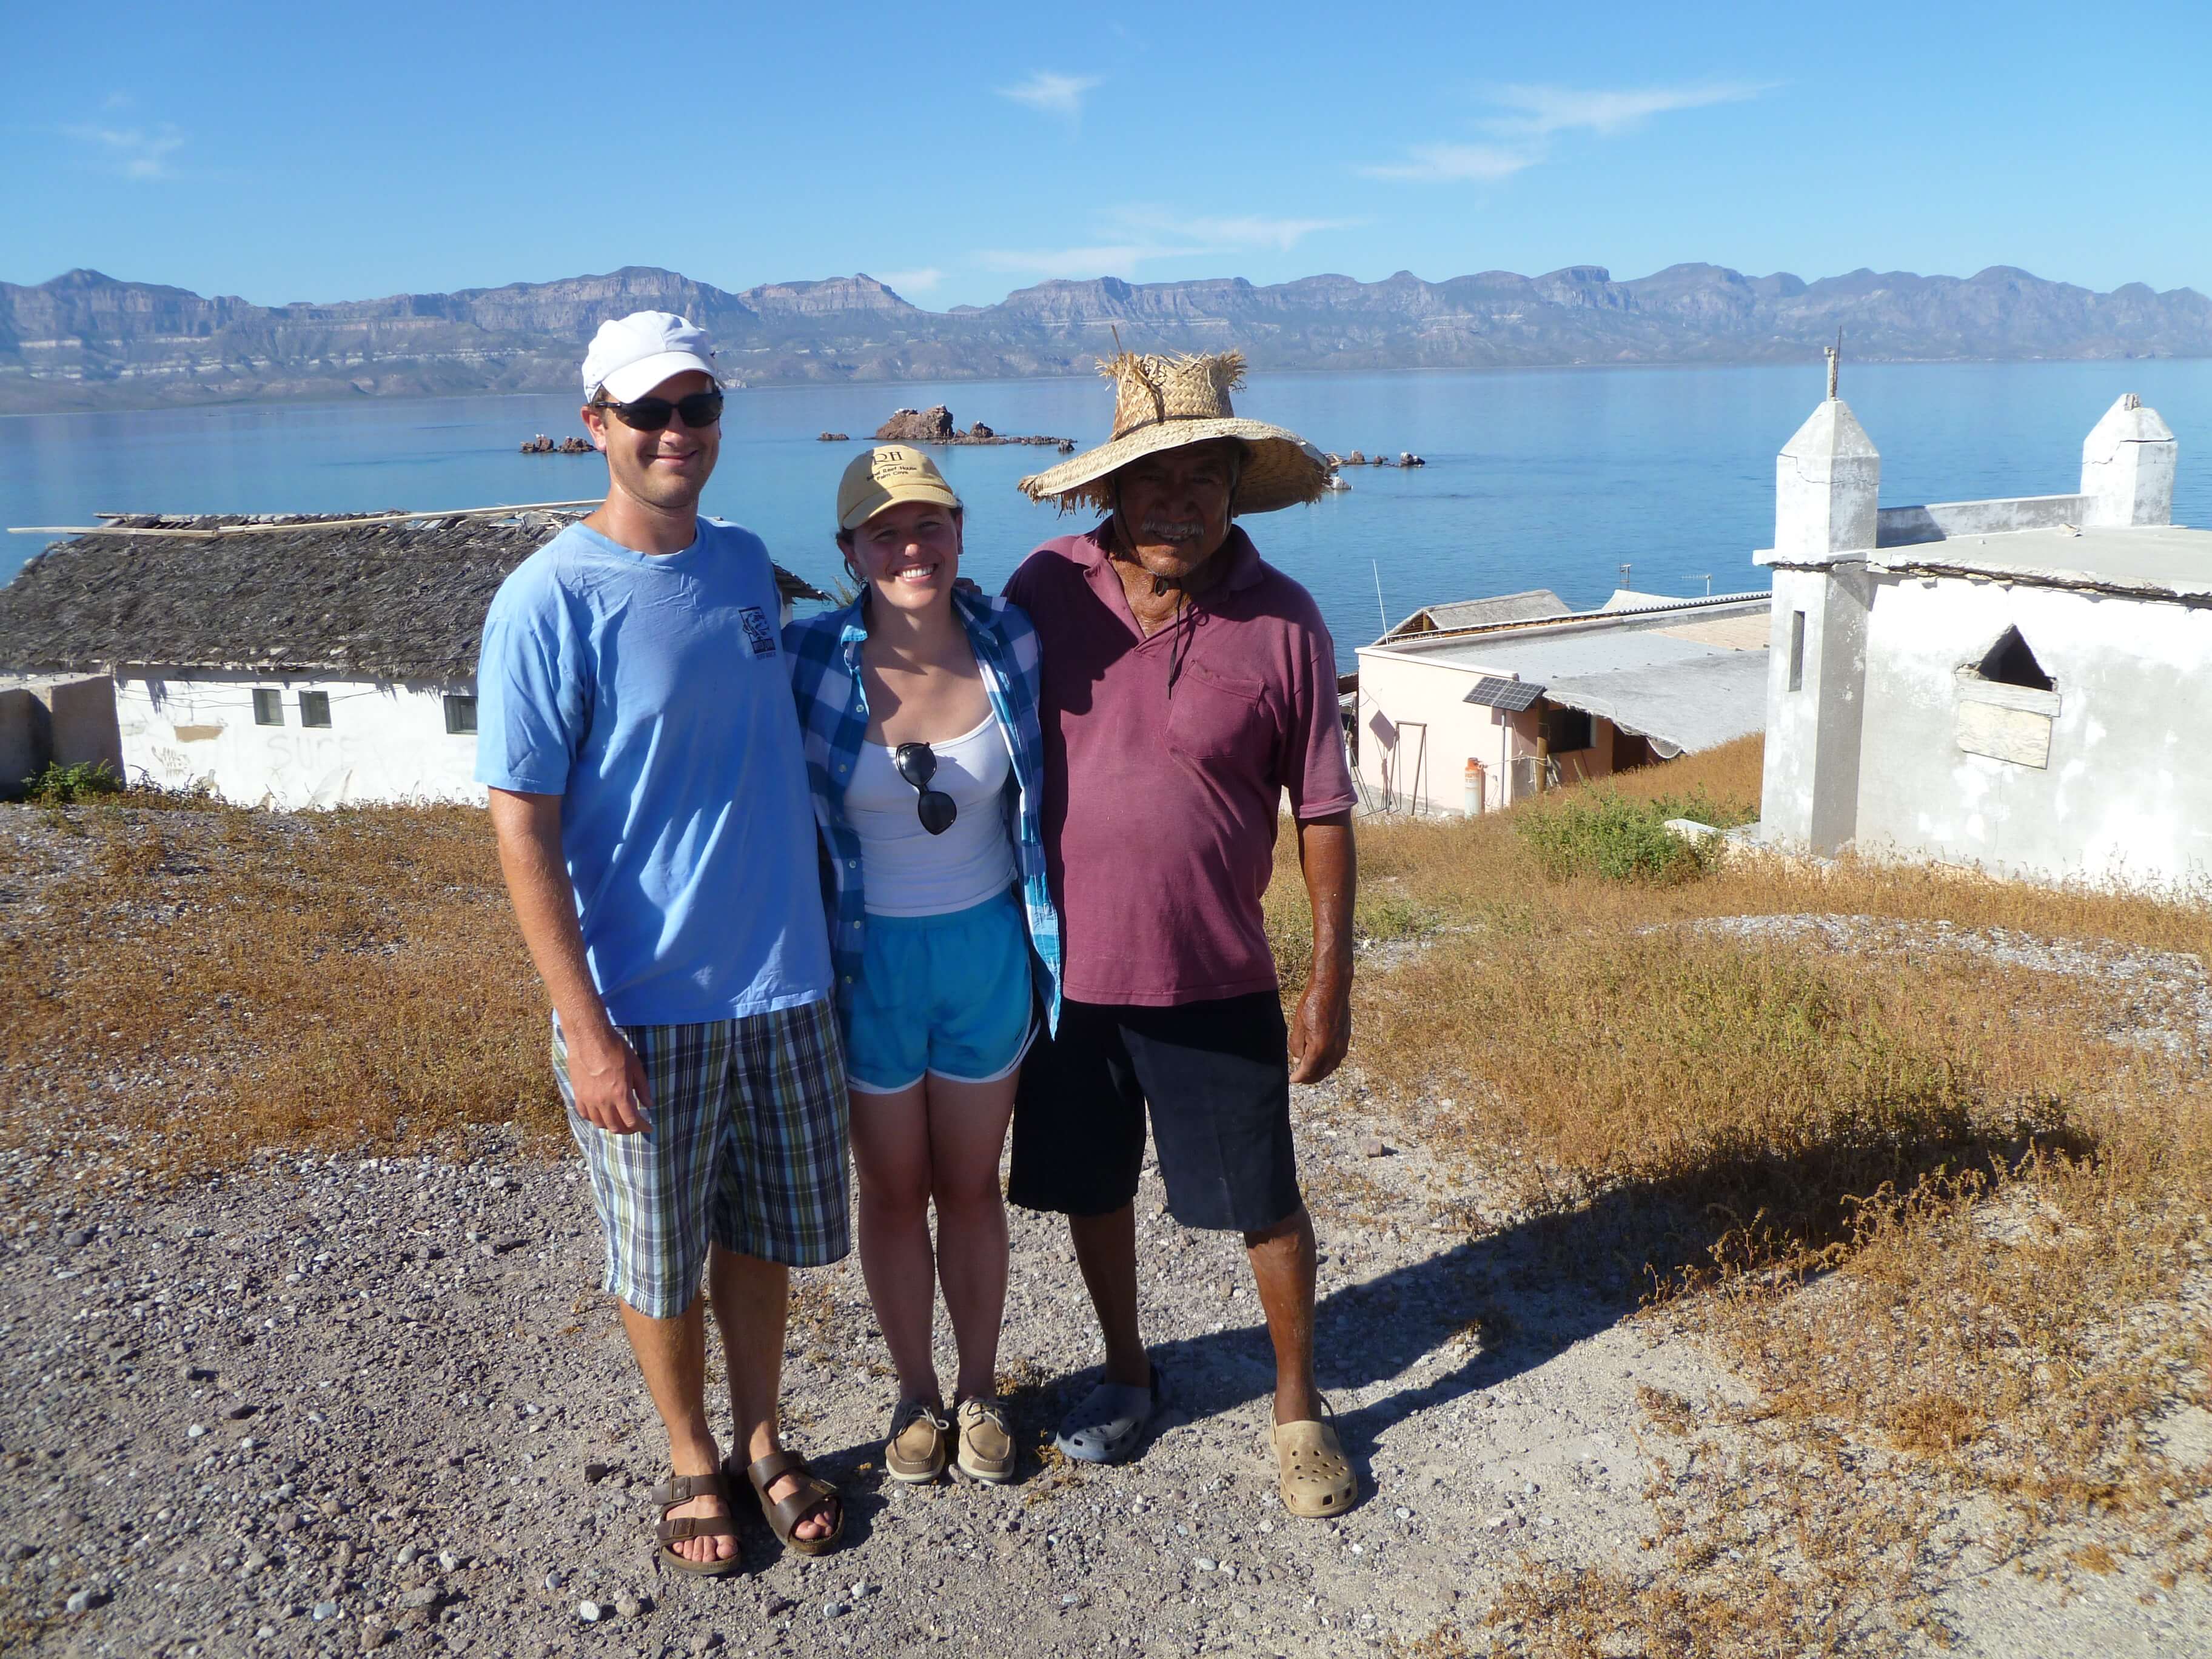 Meeting Manuel of Isla Coyote, a 6-person fishing island in the Sea of Cortez 